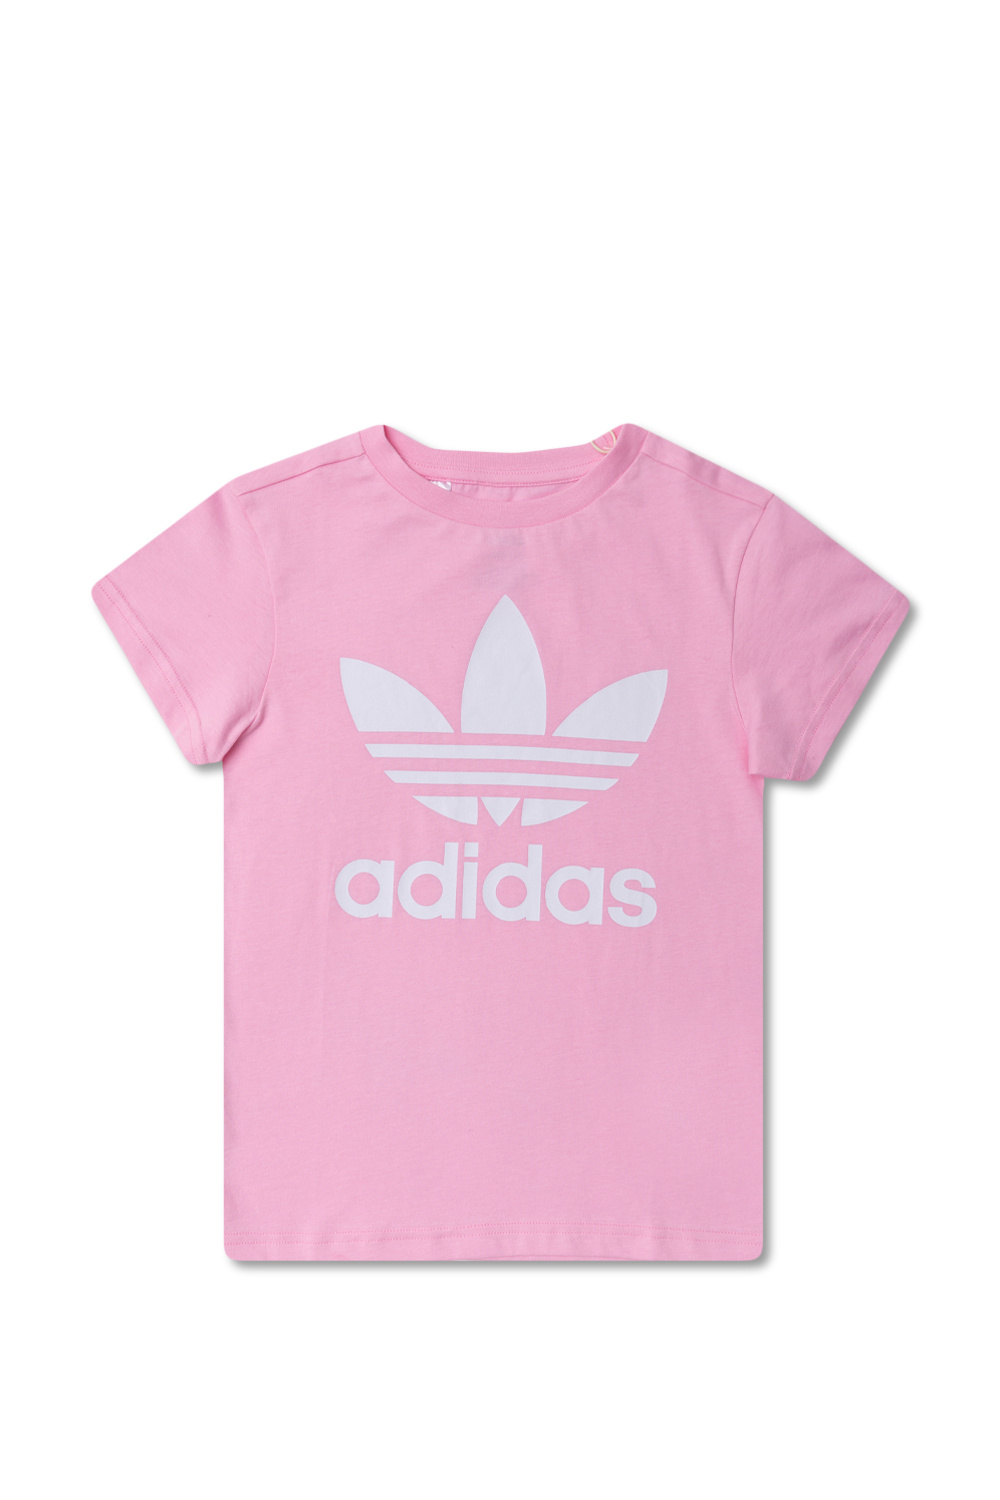 IetpShops Canada - Pink T status logo - server list today with cheap - Kids location in order ADIDAS adidas cheap shirt